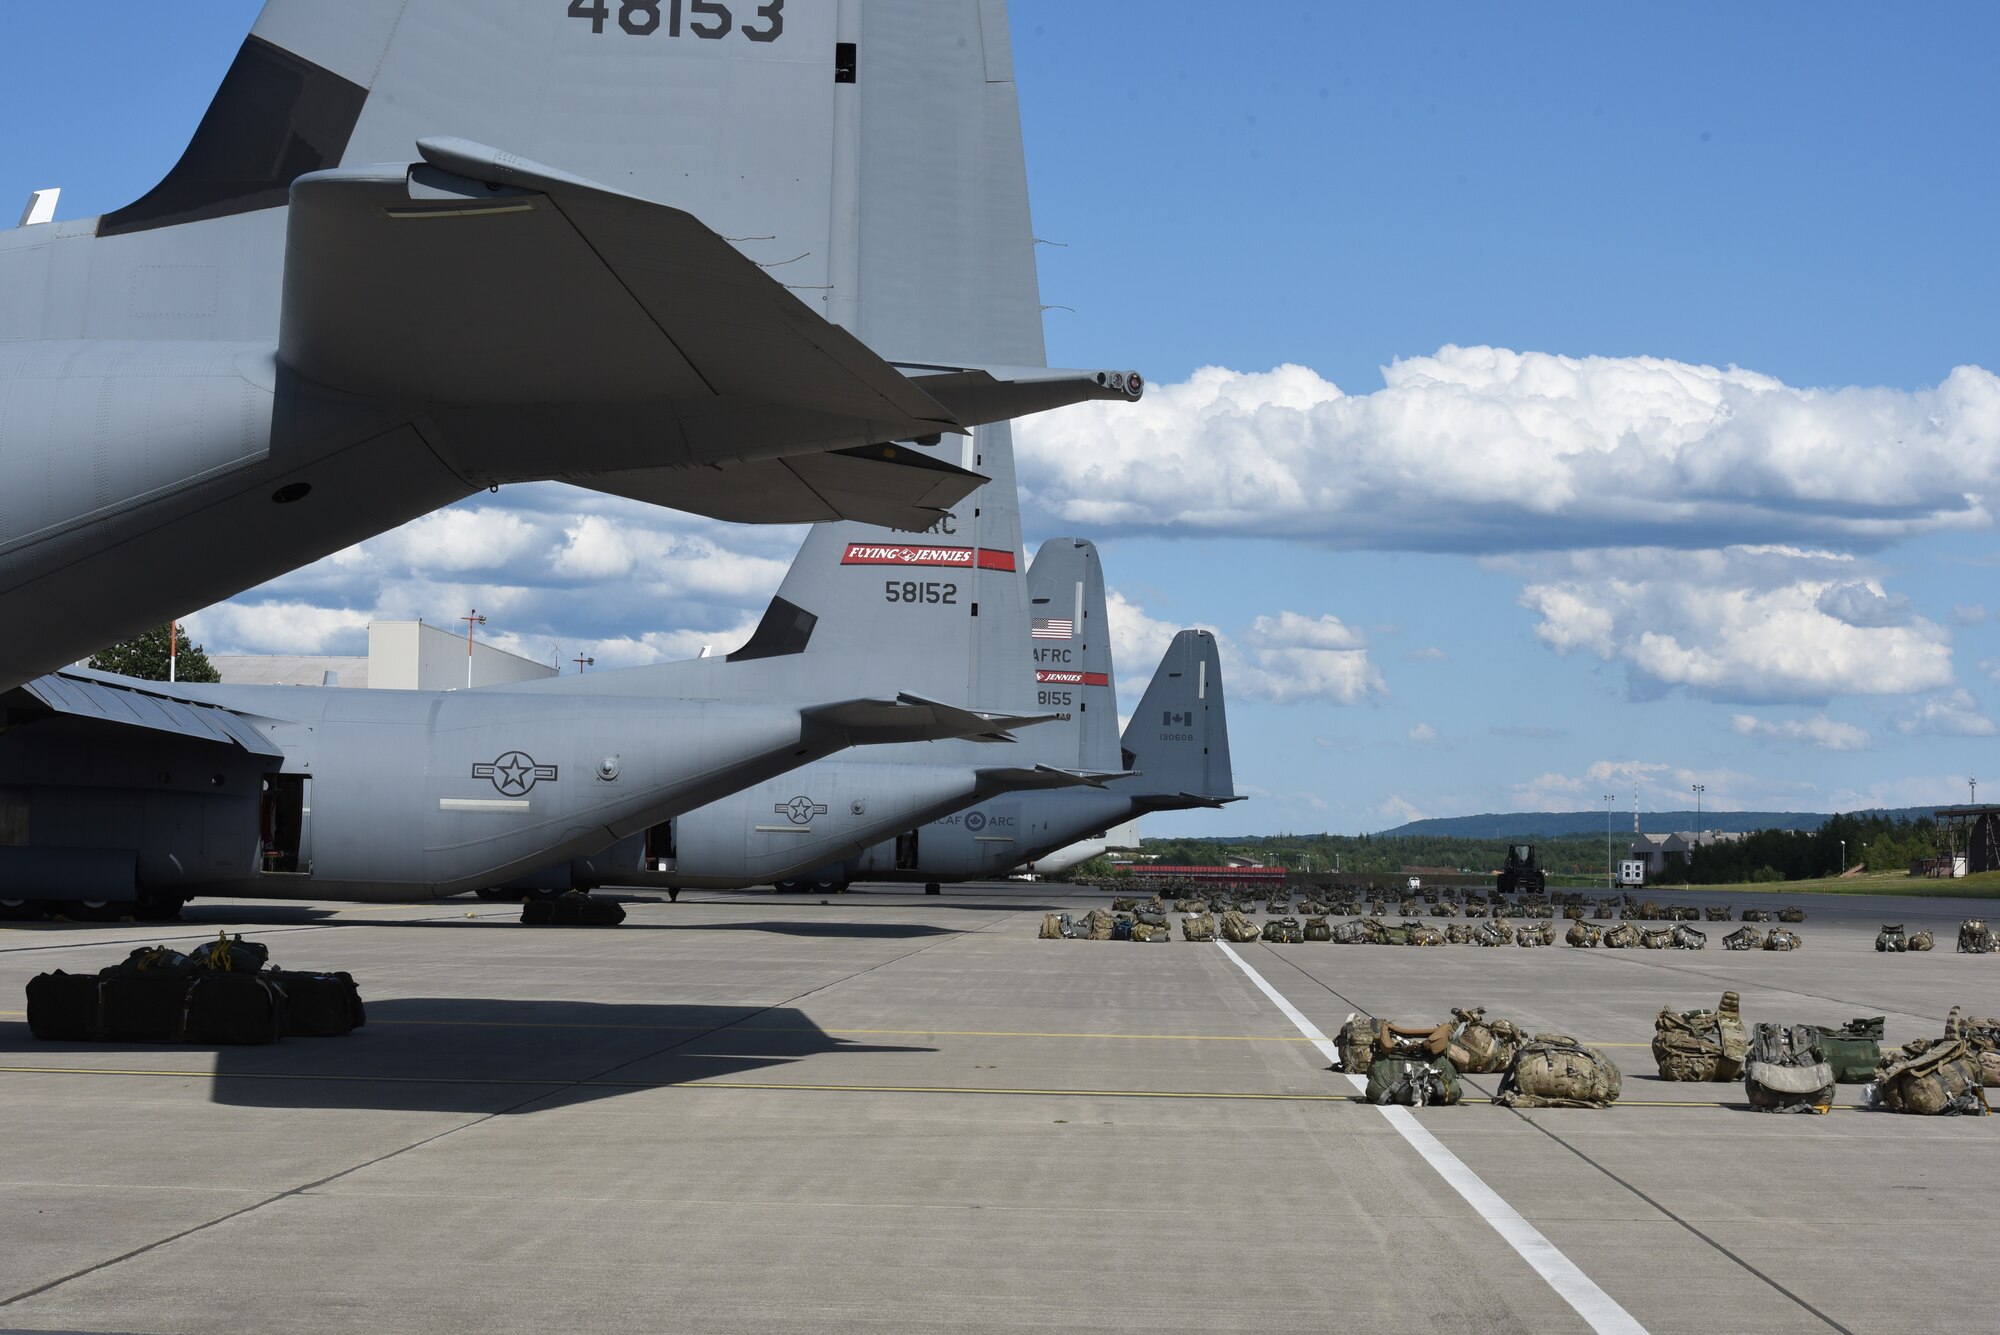 Army ruck sacks sit behind the aircraft for the first airdrop of exercise Swift Response 19, June 13, 2019. The exercise is one of the premier military crisis response training events featuring high readiness airborne forces from eight NATO nations. Activities include intermediate staging base operations, multiple airborne operations, and several air assault operations. The Swift Response exercises have had great success in creating a foundation for the strong relationships we share with several European allies and partners today. (U.S. Air Force photo by Master Sgt. Jessica Kendziorek)